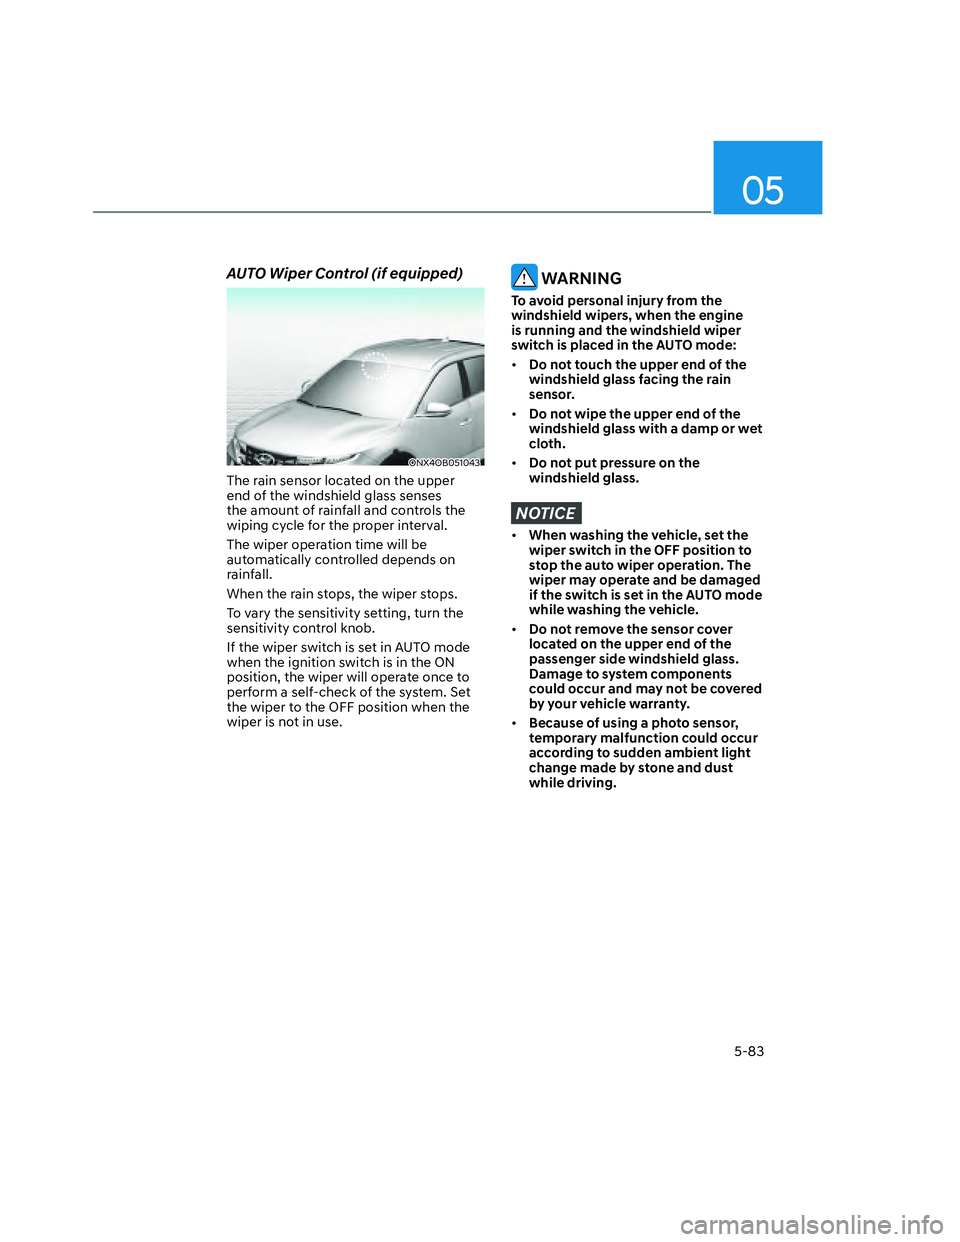 HYUNDAI SANTA CRUZ 2022  Owners Manual 05
5-83
AUTO Wiper Control (if equipped)
ONX4OB051043ONX4OB051043
The rain sensor located on the upper 
end of the windshield glass senses 
the amount of rainfall and controls the 
wiping cycle for th